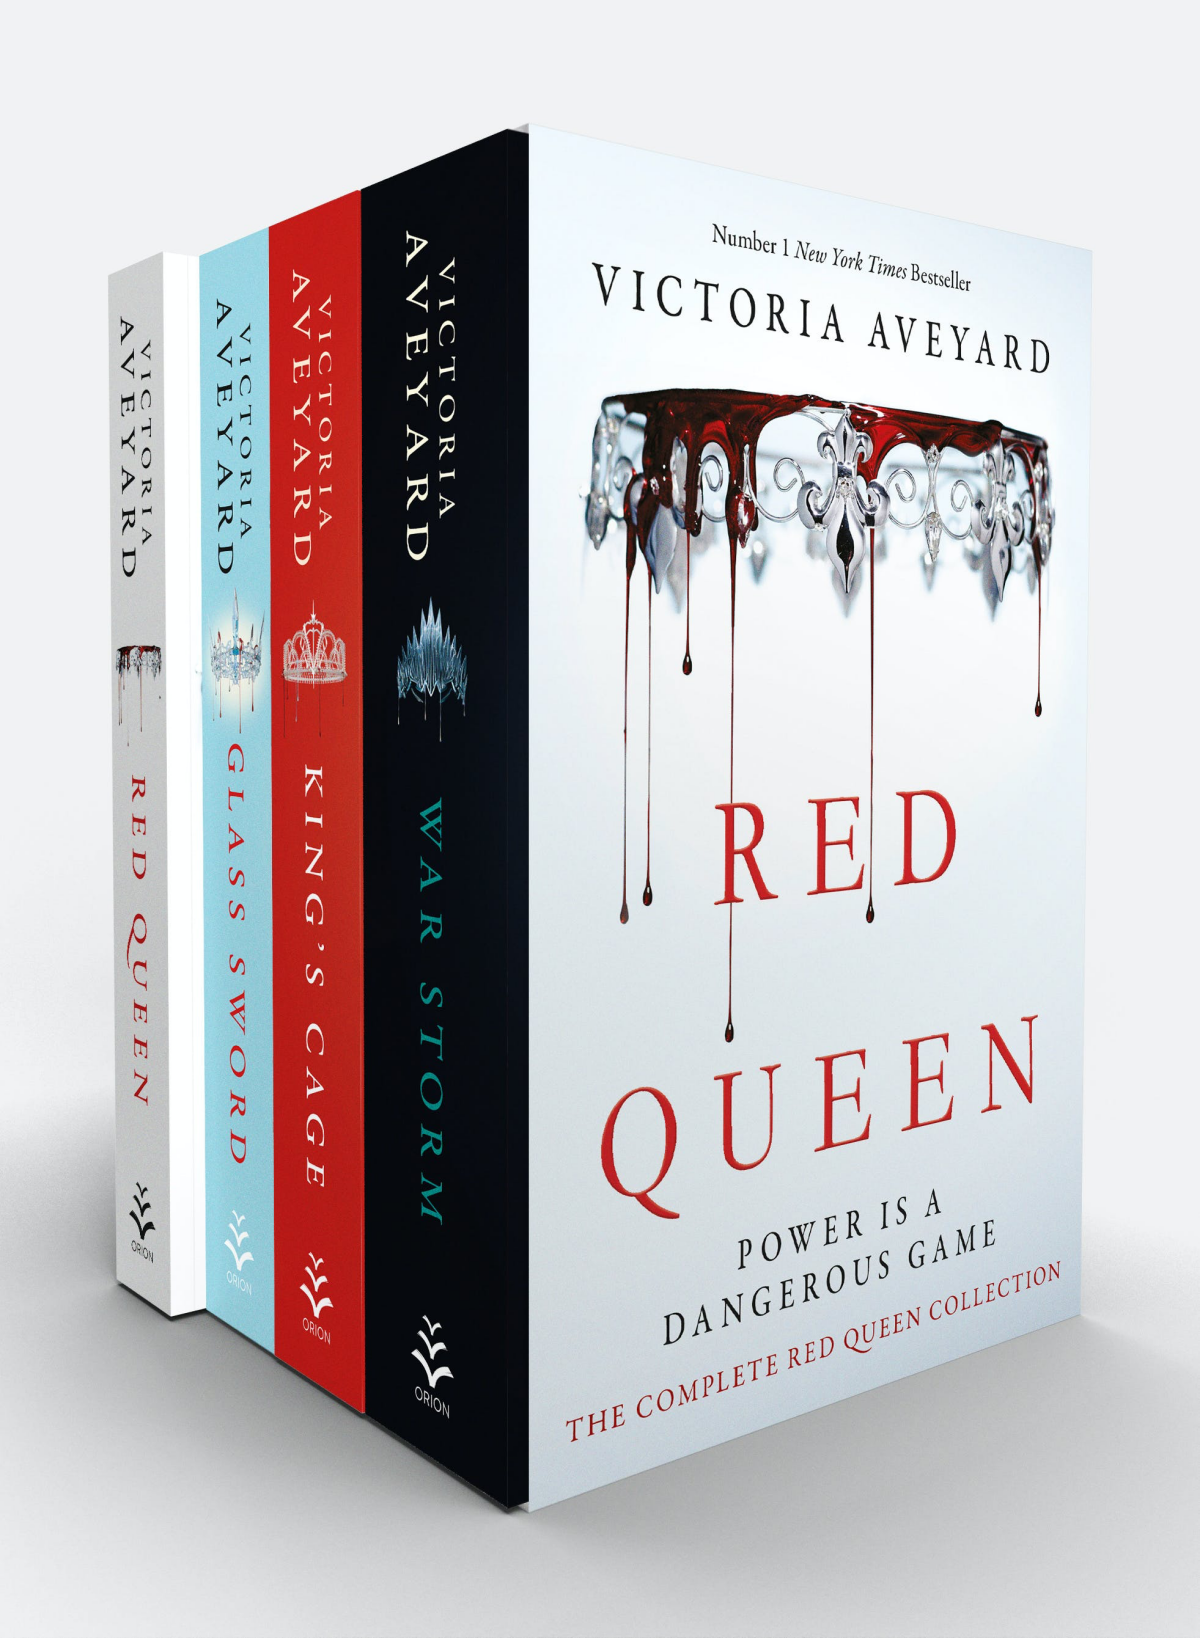 the red queen book series